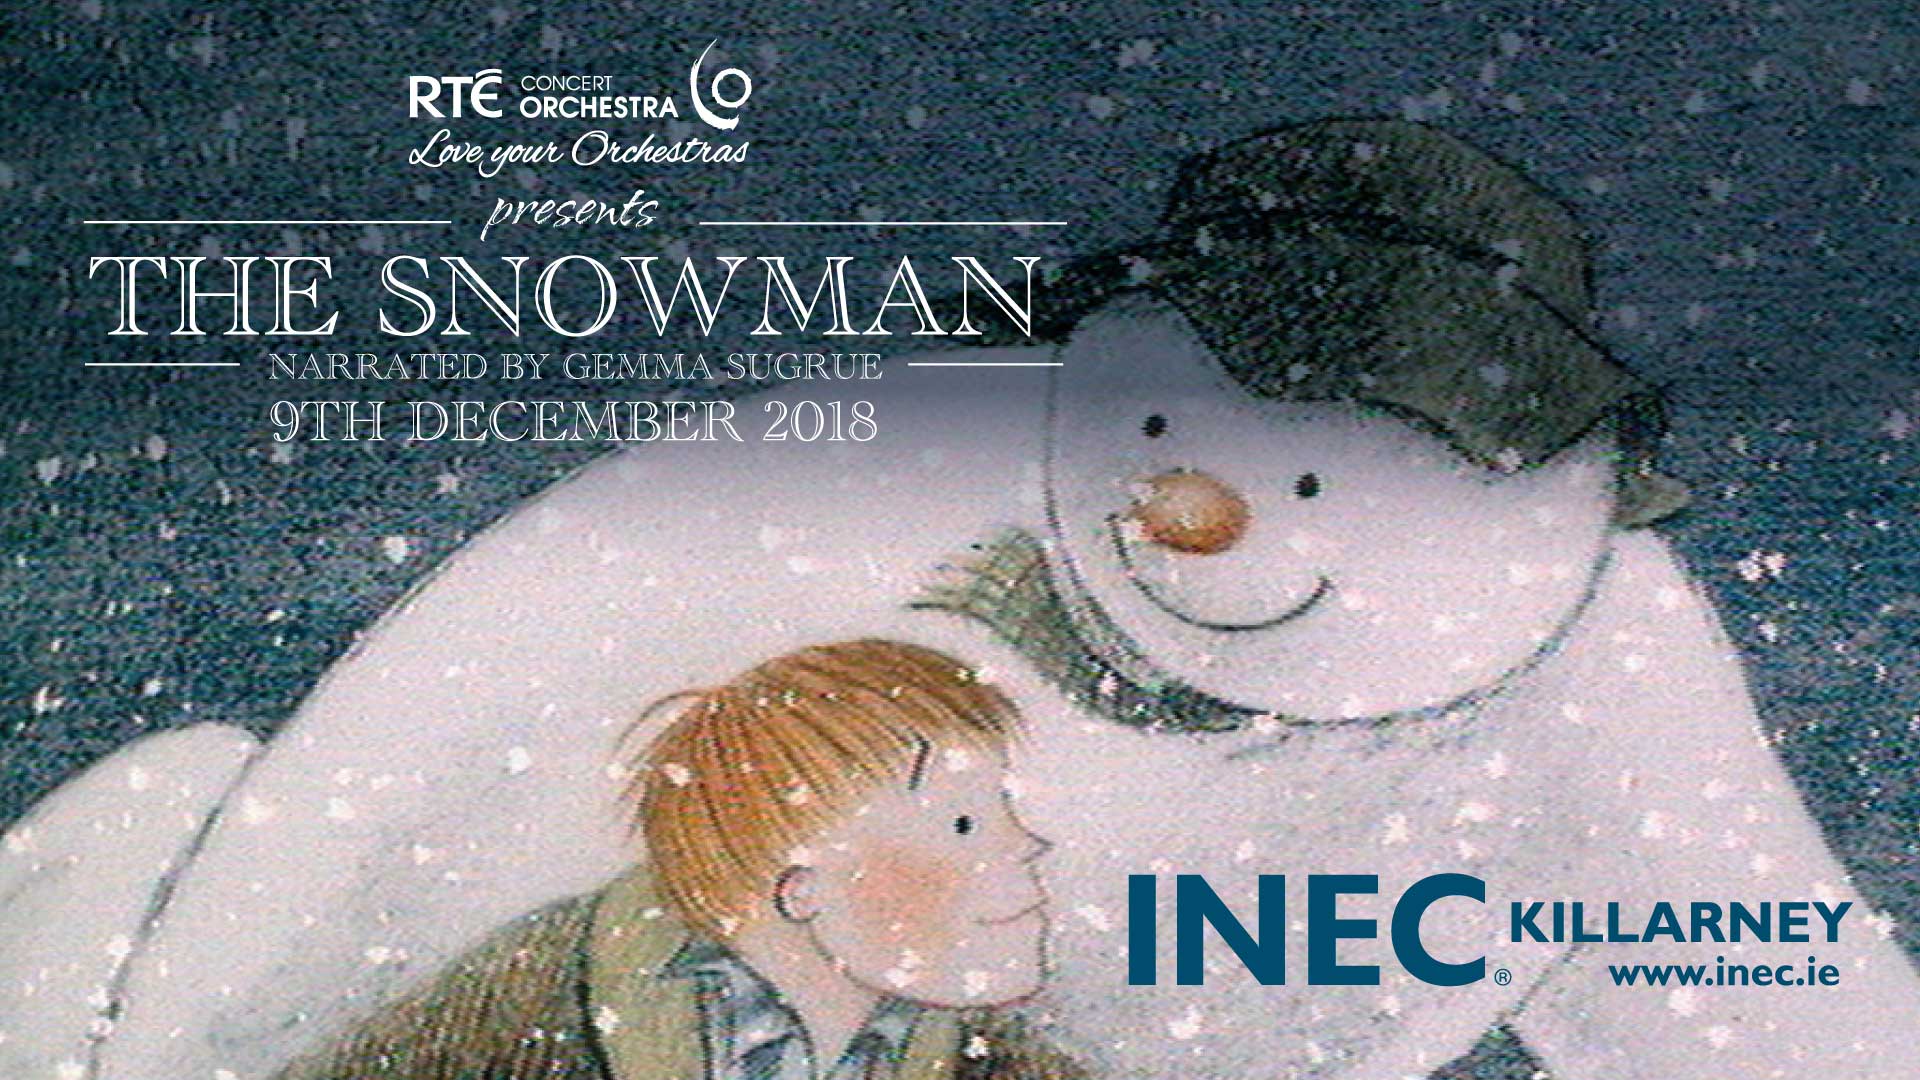 RTÉ Concert Orchestra presents The Snowman narrated by Gemma Sugrue this December 9th in the INEC Killarney